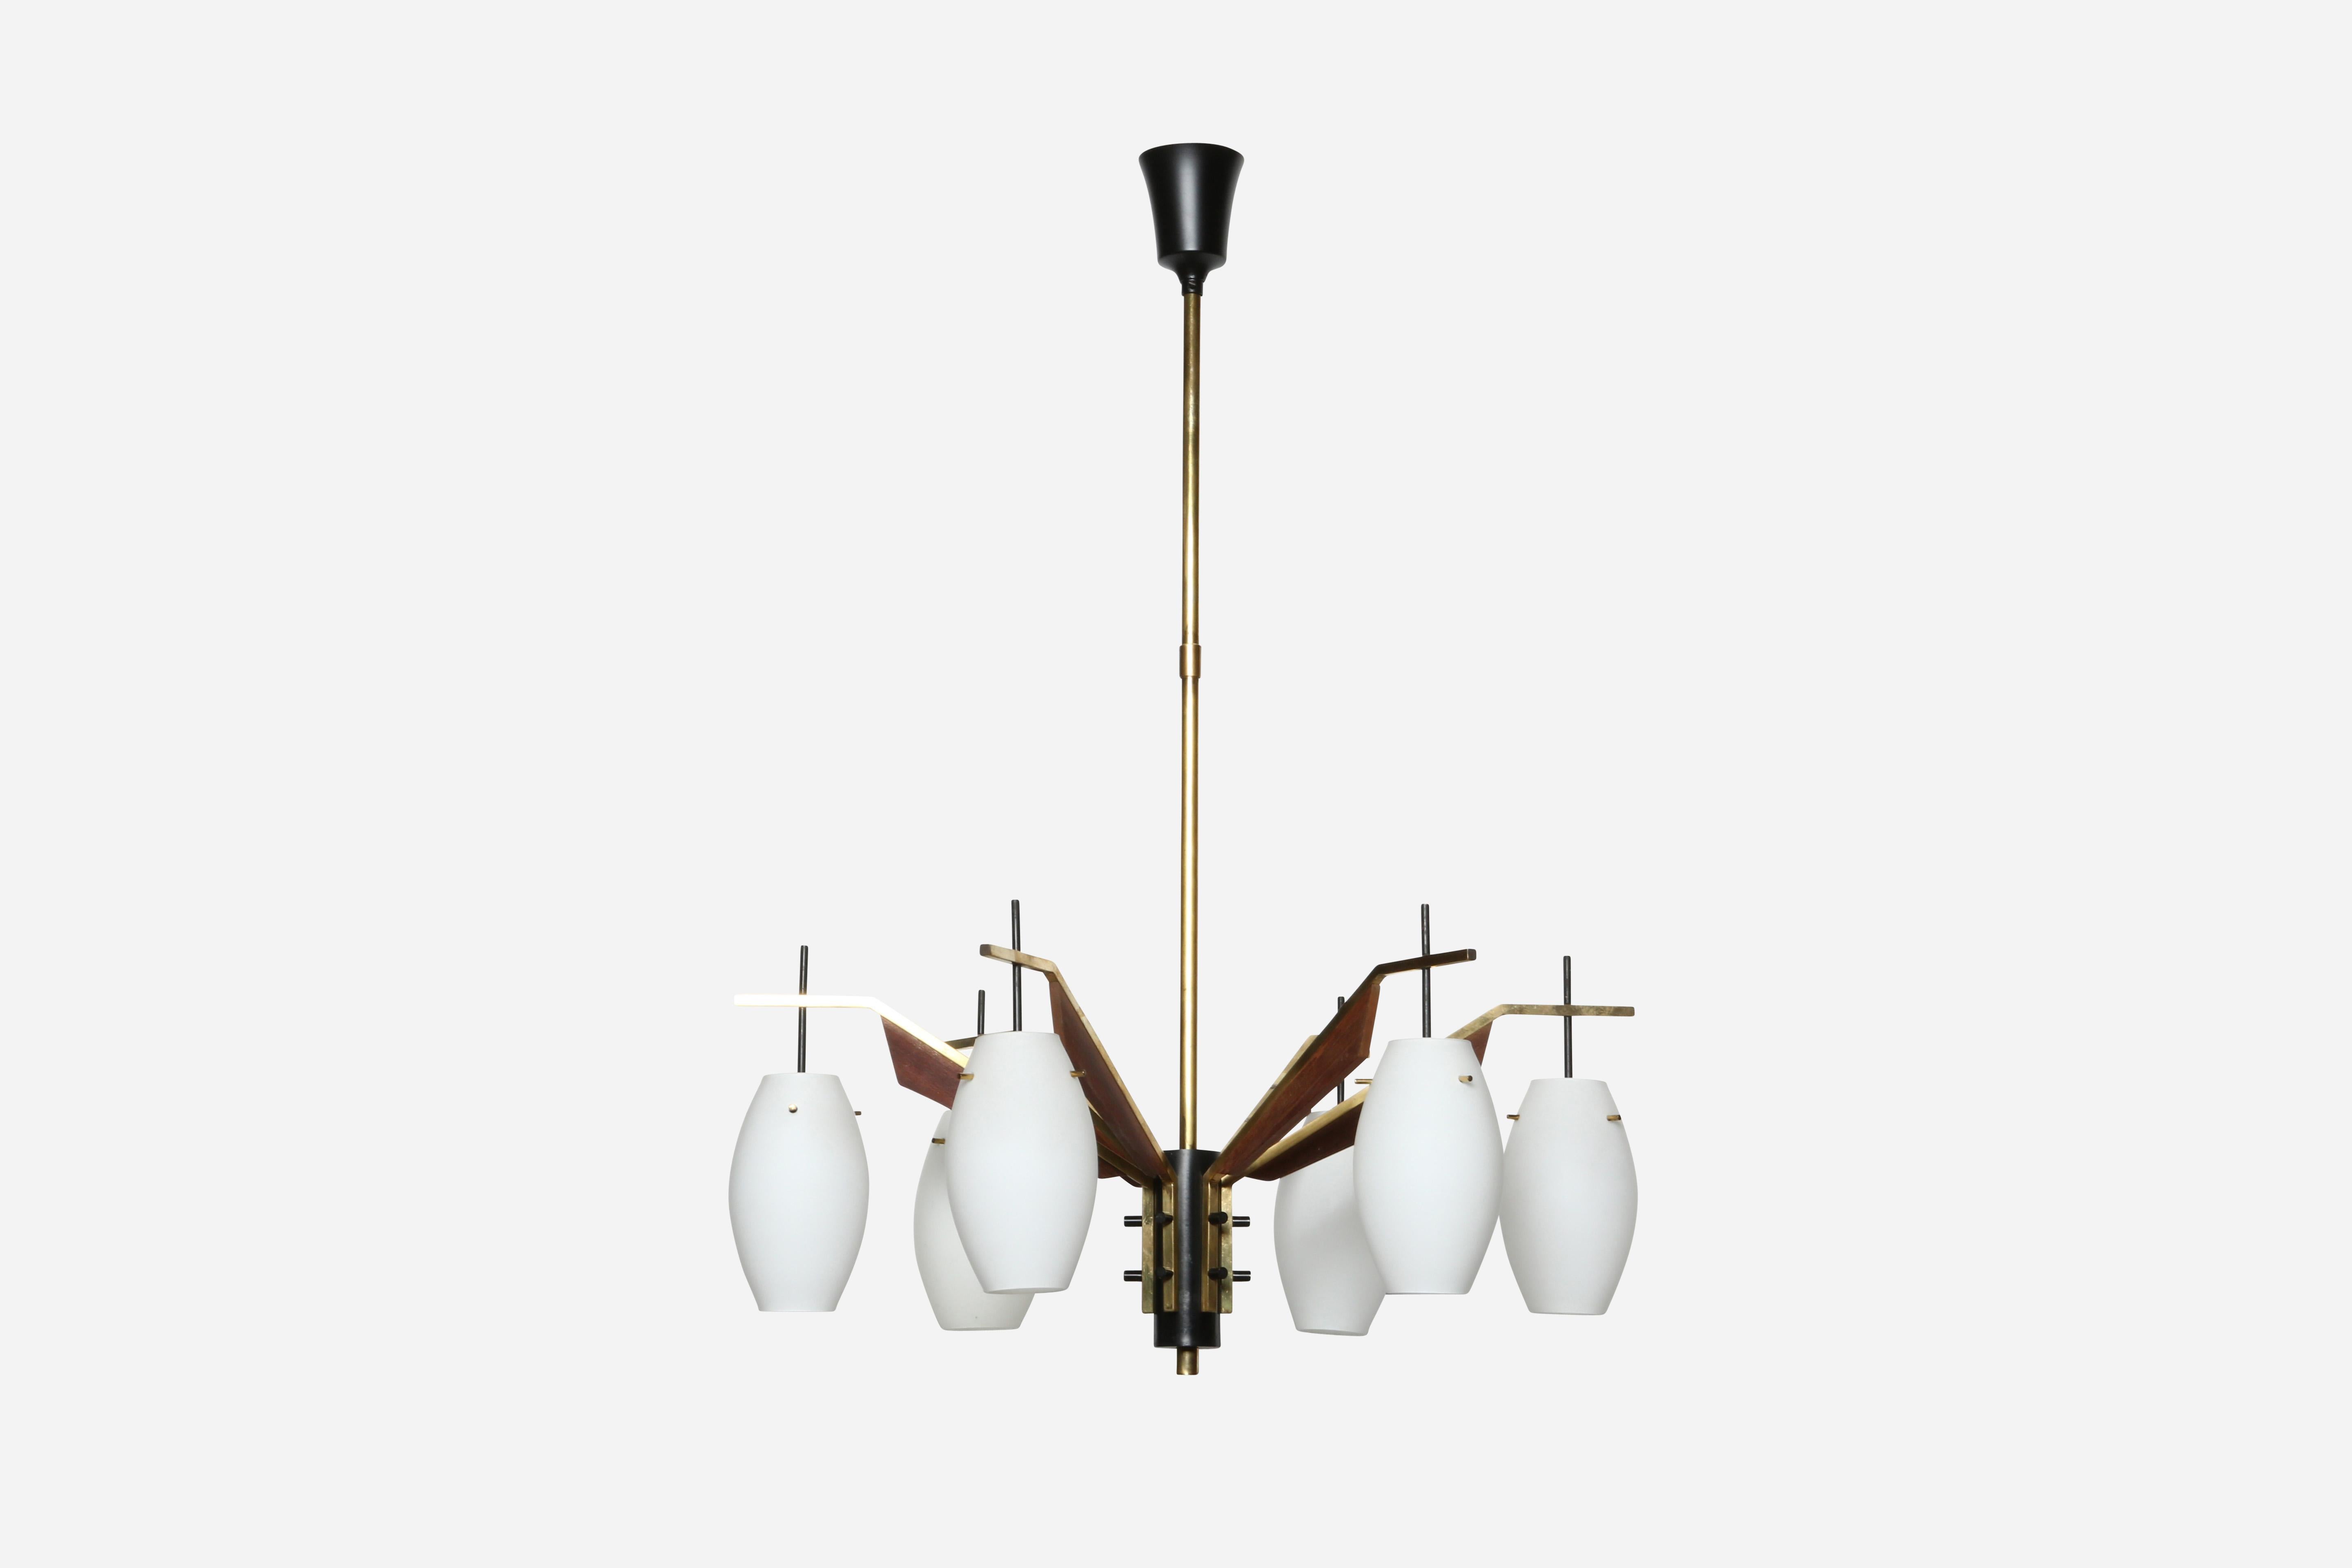 Stilnovo style chandelier.
Designed and made in Italy, 1960s.
Opaline glass, brass, wood, enameled metal.
Takes six candelabra bulbs.
Complimentary US rewiring upon request.

We take pride in bringing vintage fixtures to their full glory again.
At